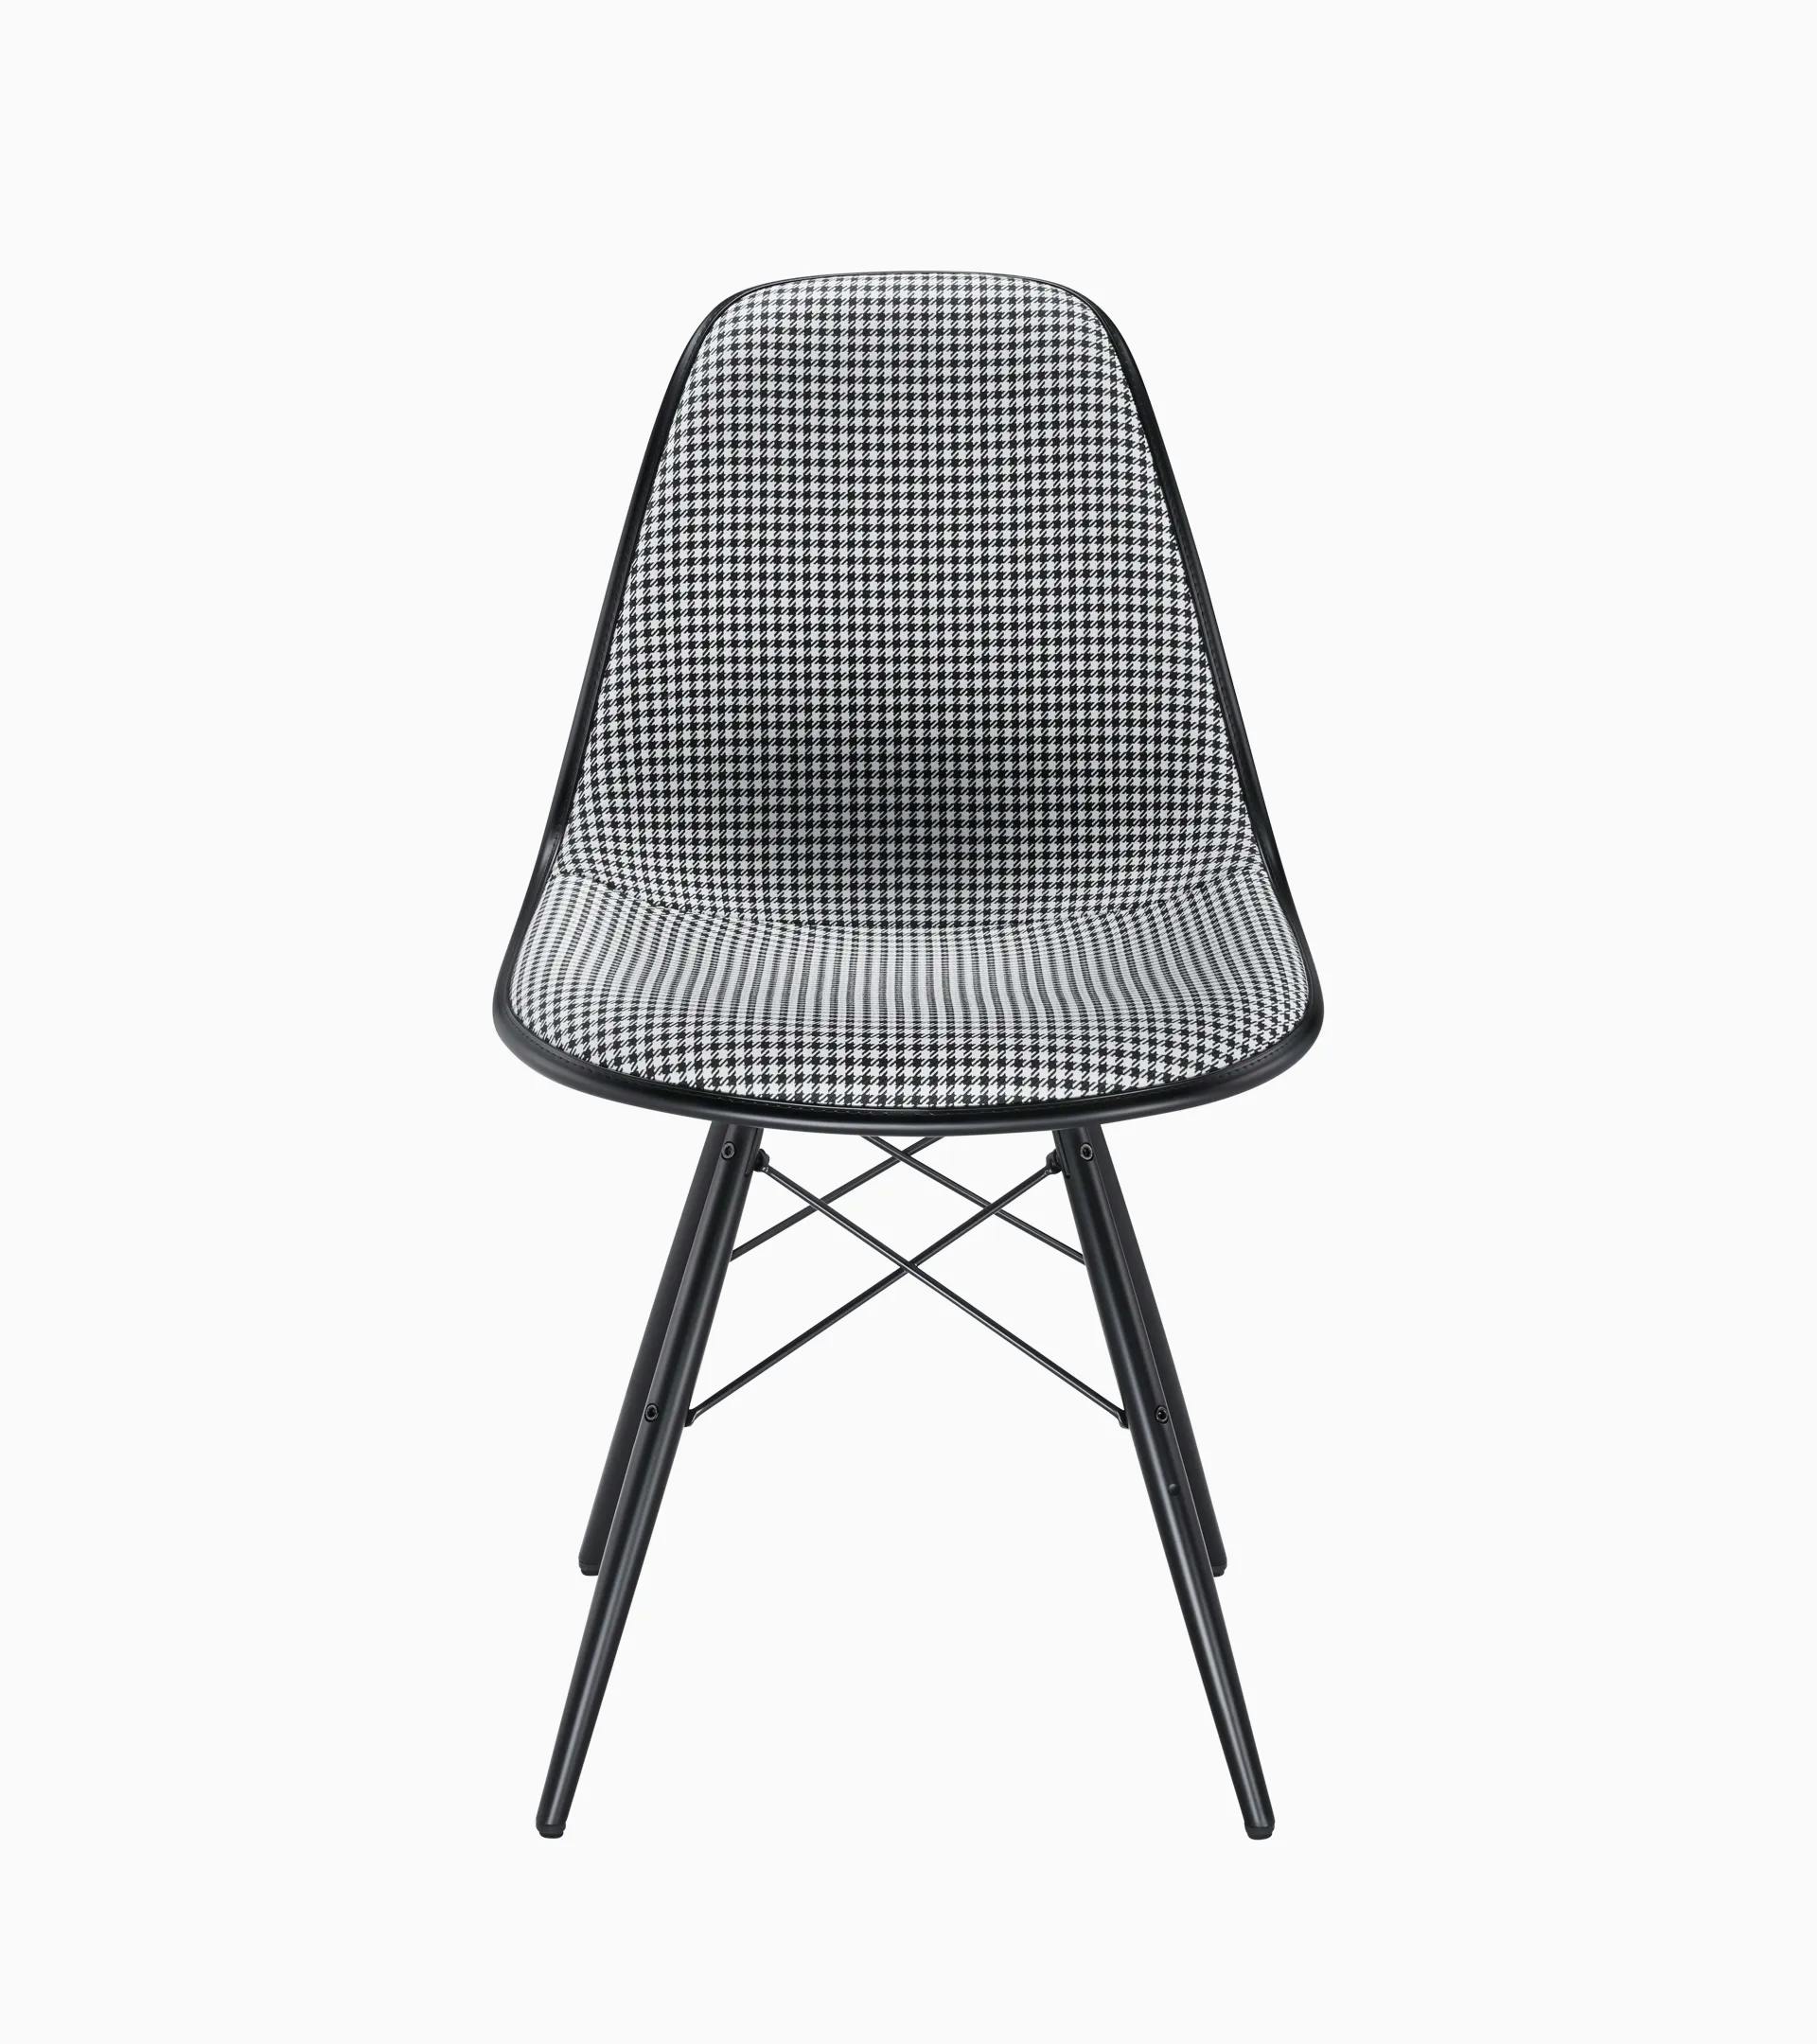 Eames Plastic Side Chair Pepita Edition – Limited Edition 1